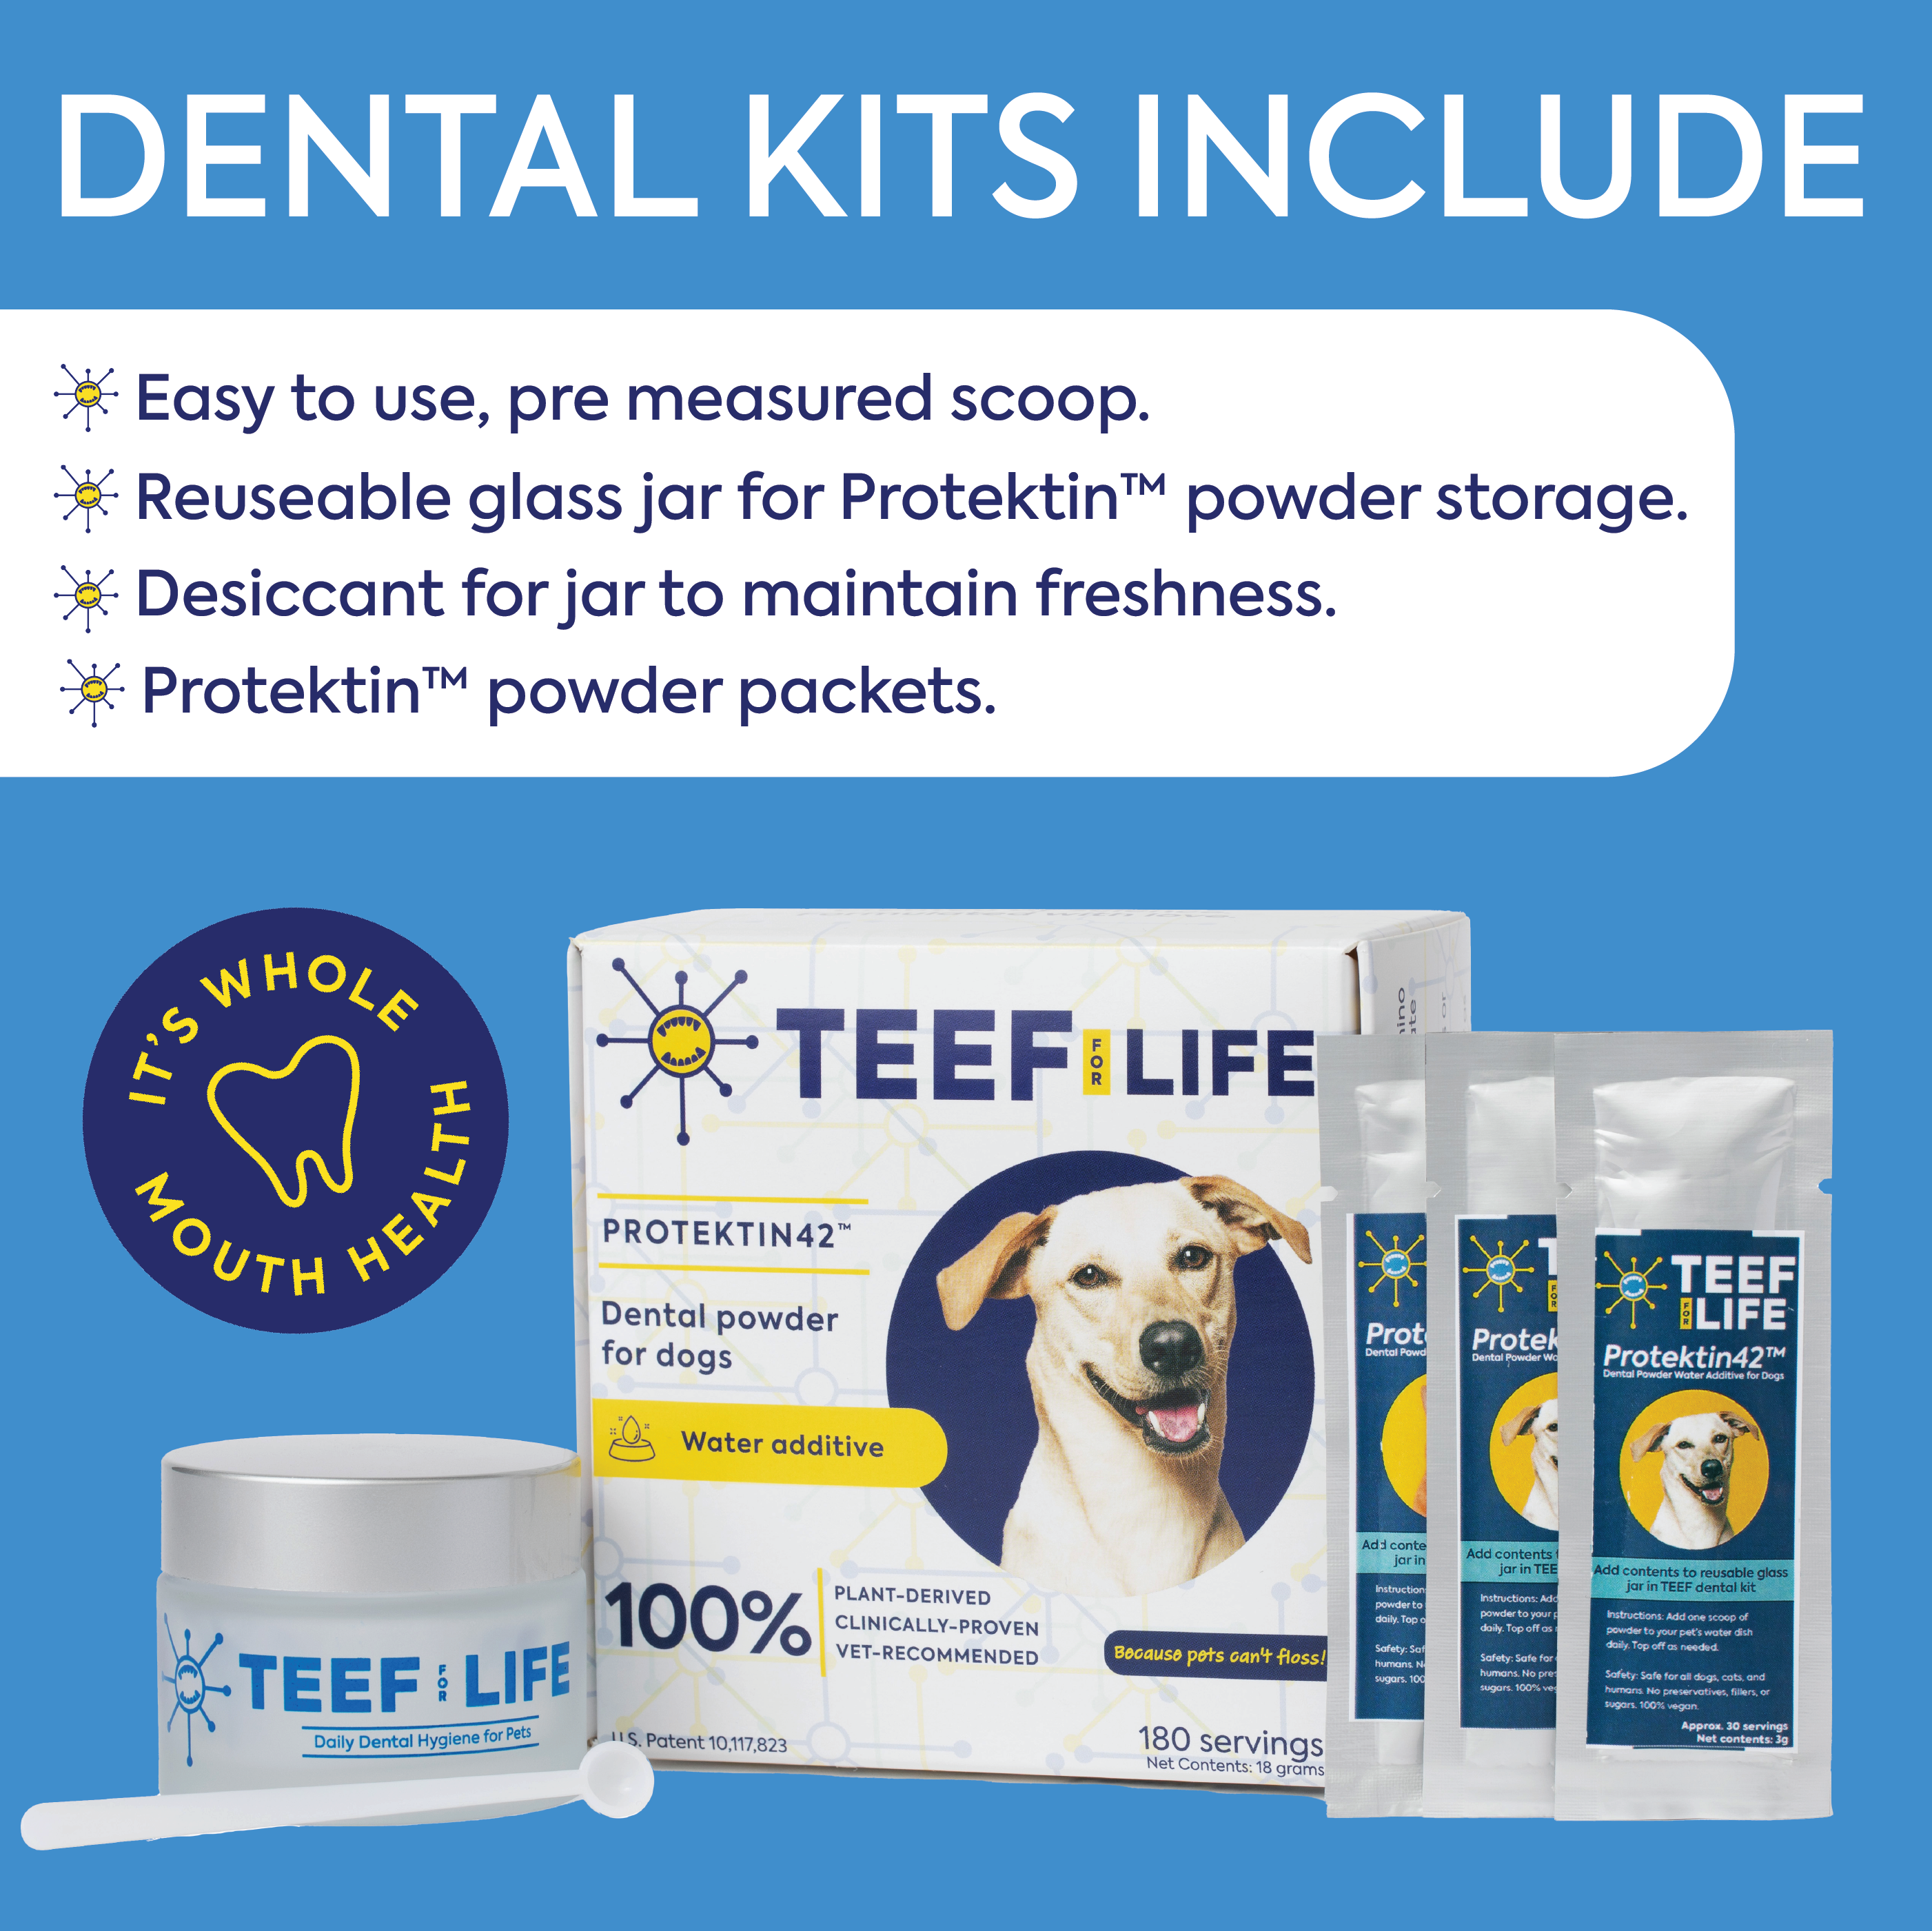 Refill Powder Packet: TEEF for Life - Protektin42™ Dental Powder Water Additive for Dogs